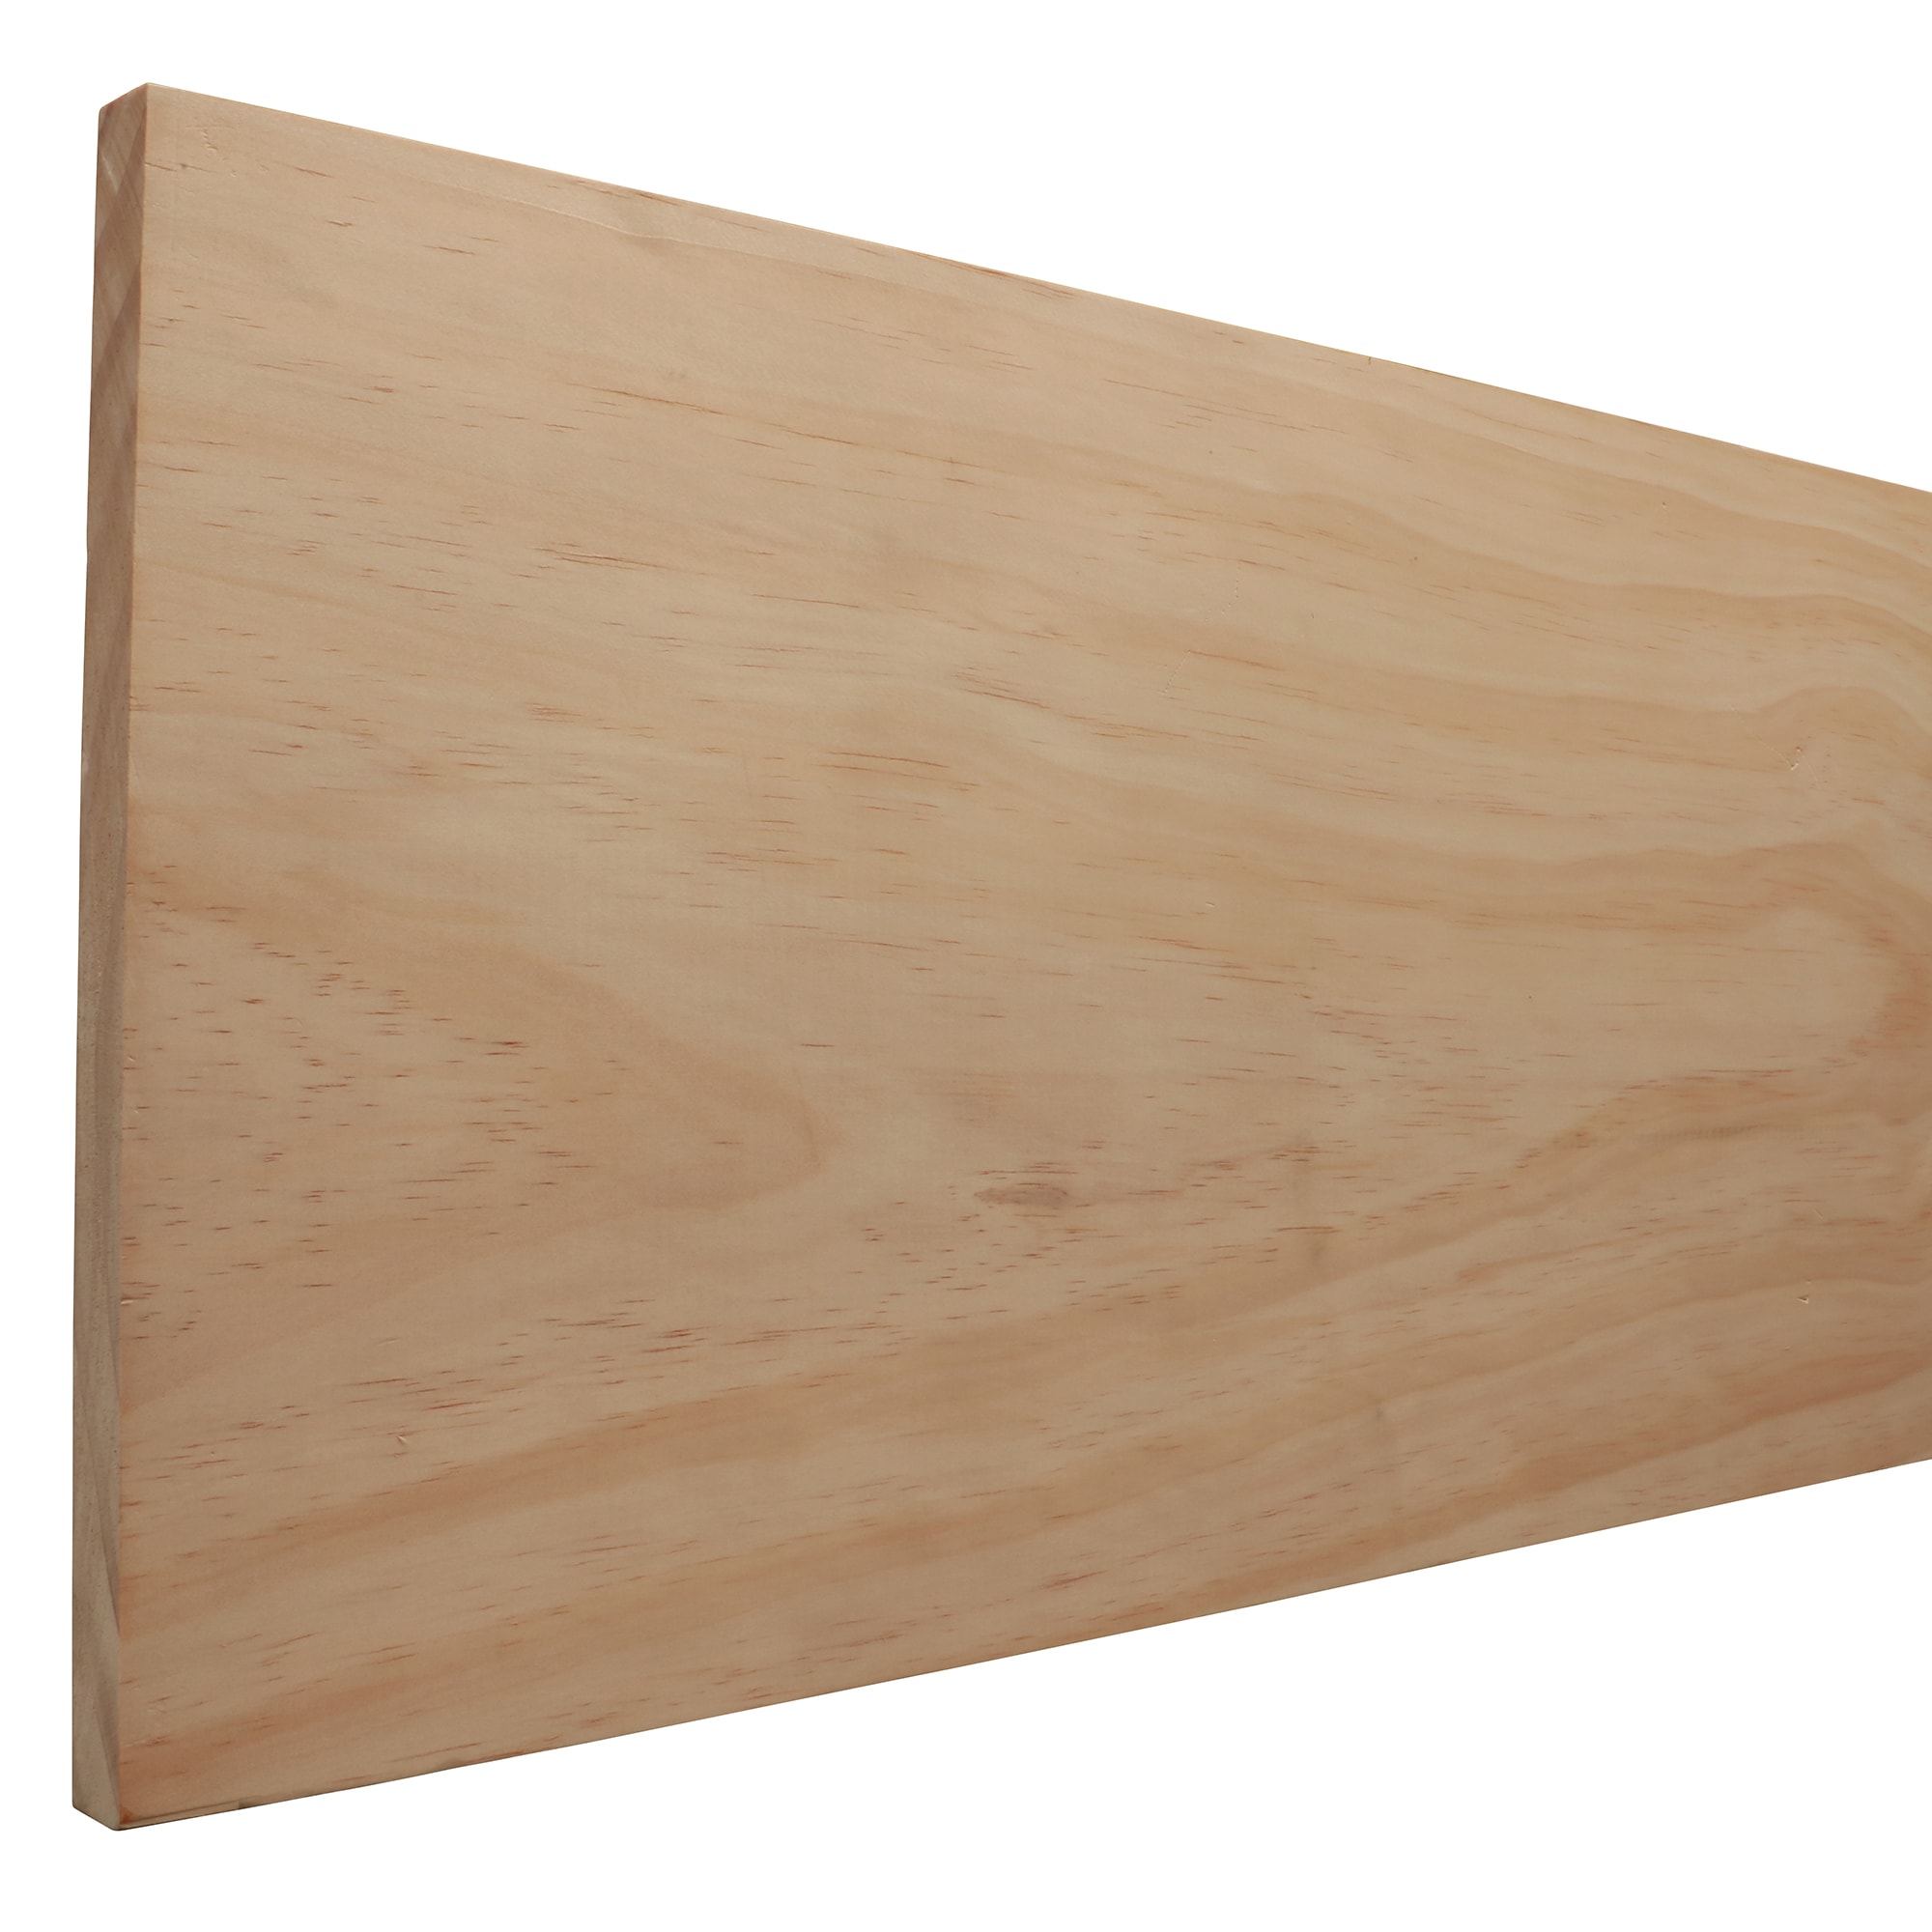 1 in x 12 in - Appearance Boards - Boards, Planks & Panels - The